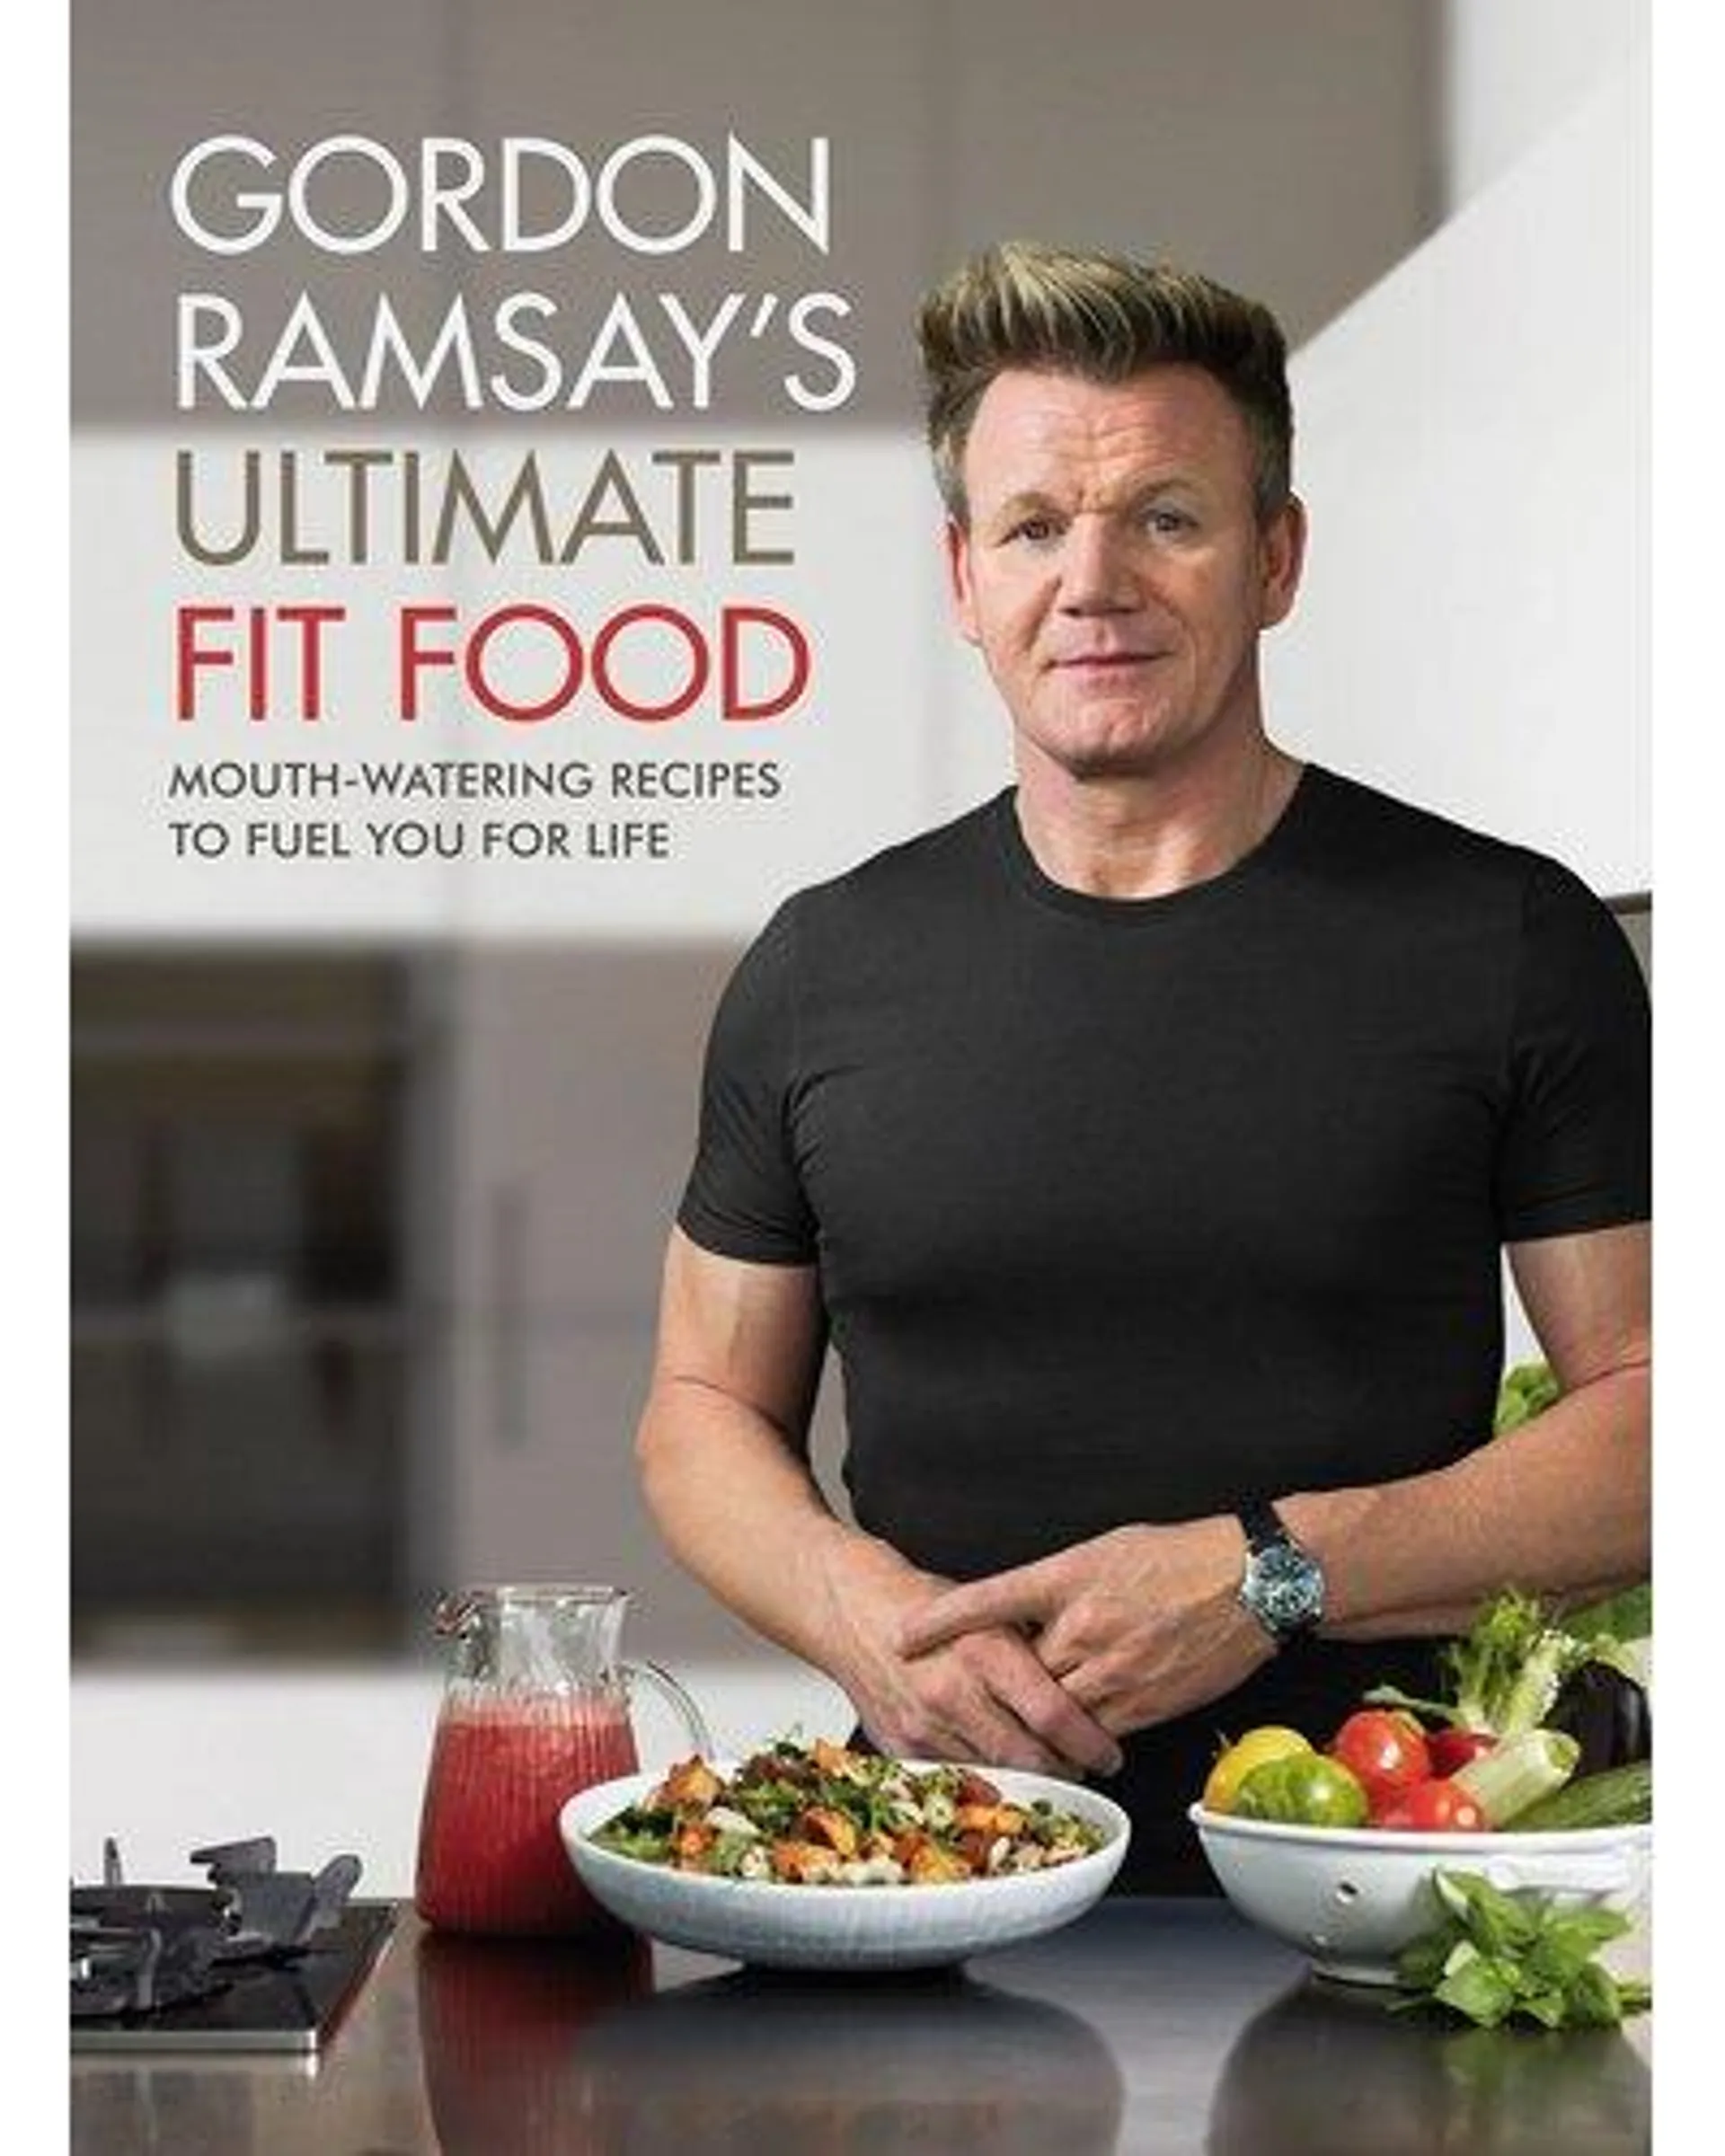 Ultimate Fit Food - Mouth-watering recipes to fuel you for life (Hardcover)